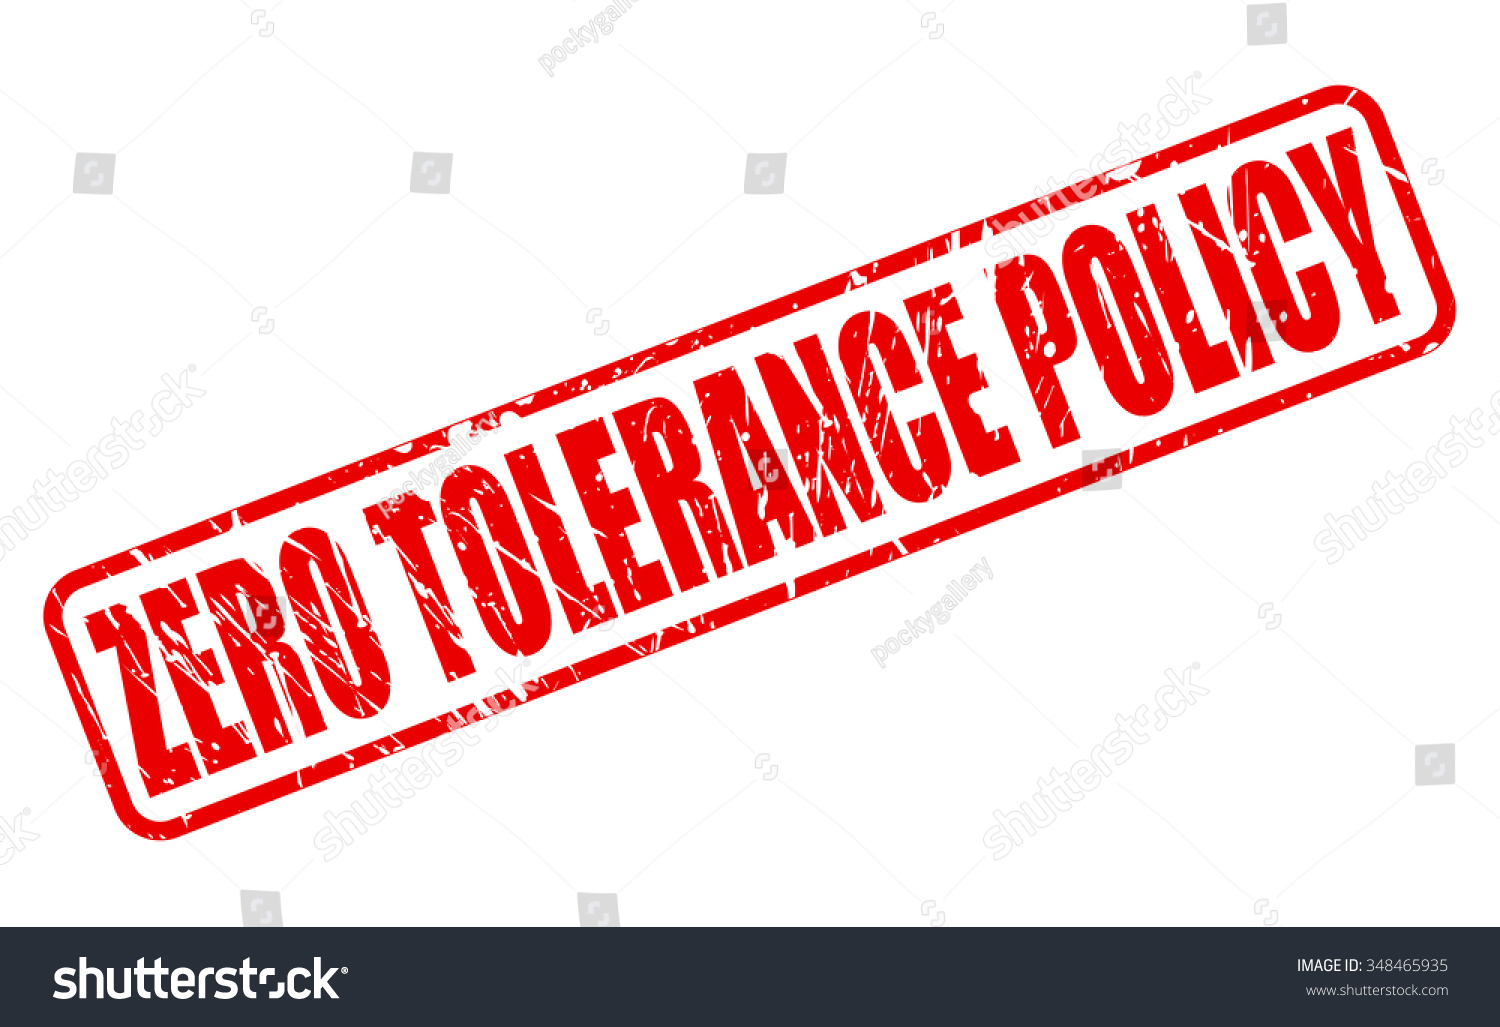 Zero Tolerance Policy Red Stamp Text Stock Vector Royalty Free 348465935 Shutterstock 8784